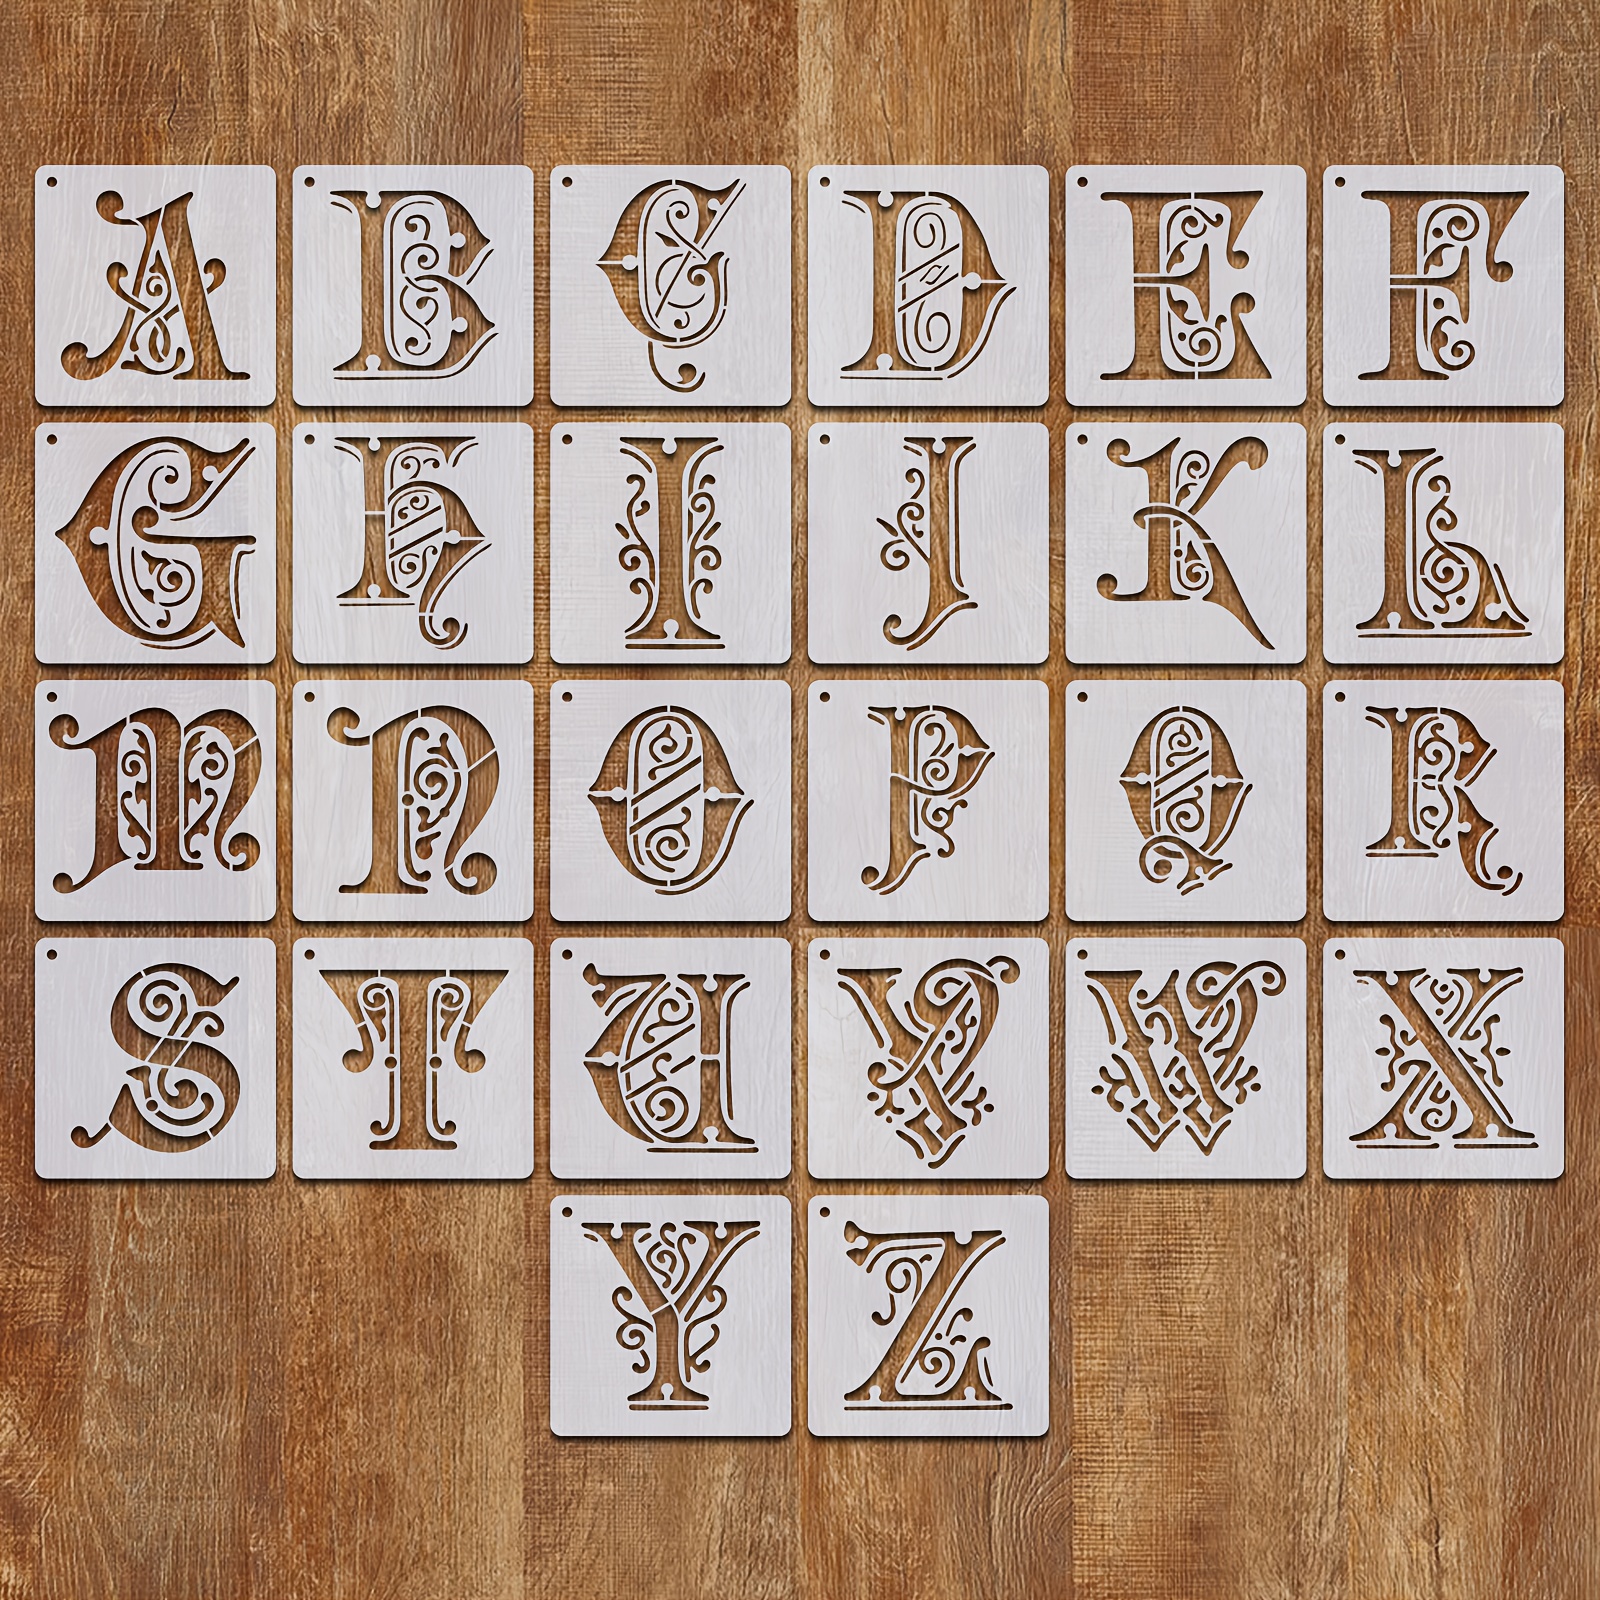 

26-piece Artistic Alphabet Stencils Set, 4x4 Inch Reusable Plastic Templates For Chalkboard, Fabric, Wood Signs Crafting